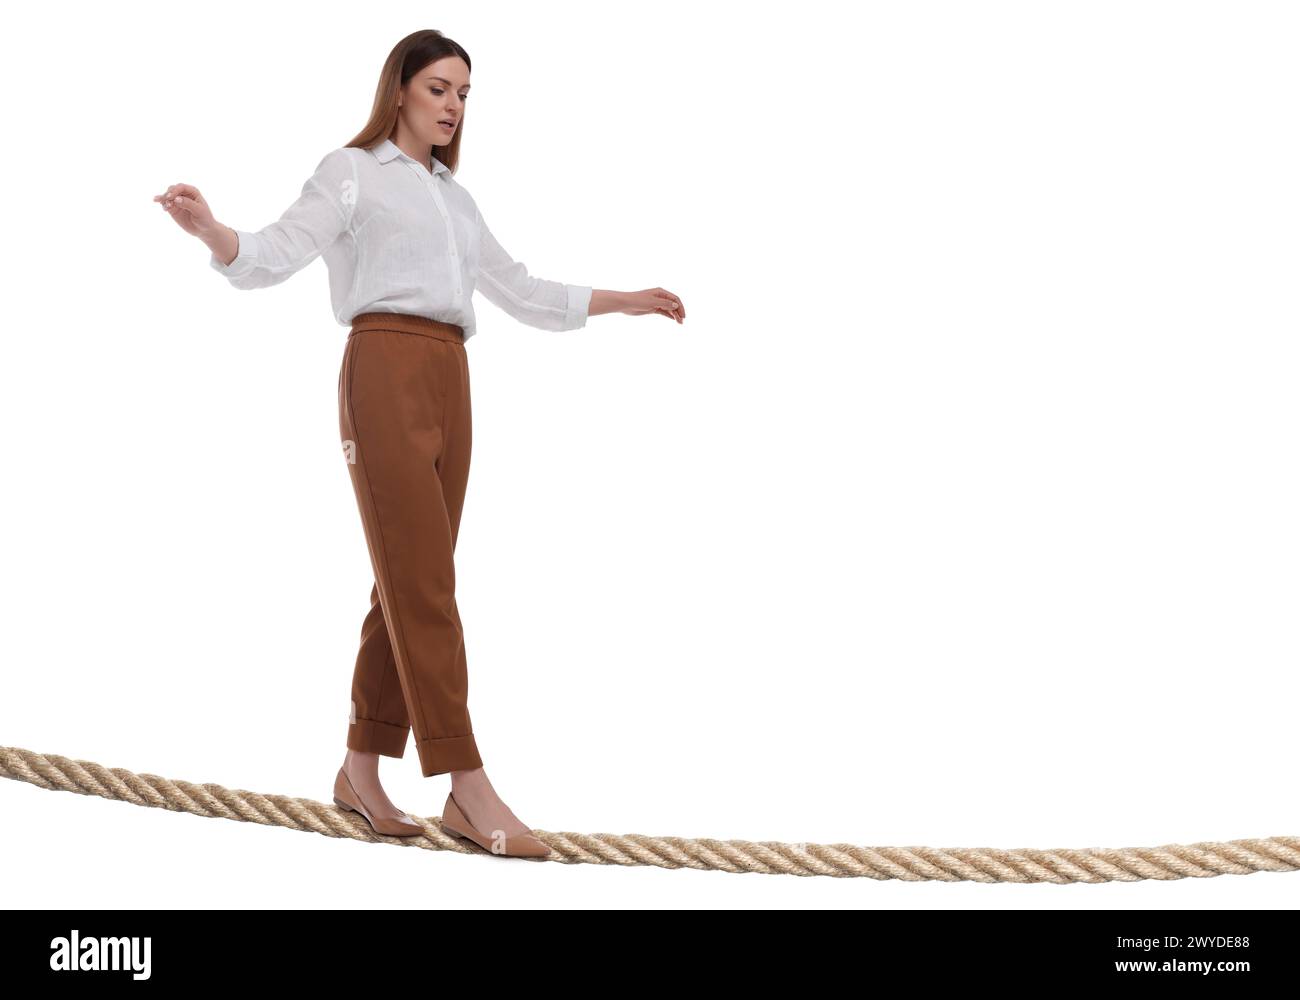 Businesswoman walking rope against white background. Risk or balance concept Stock Photo